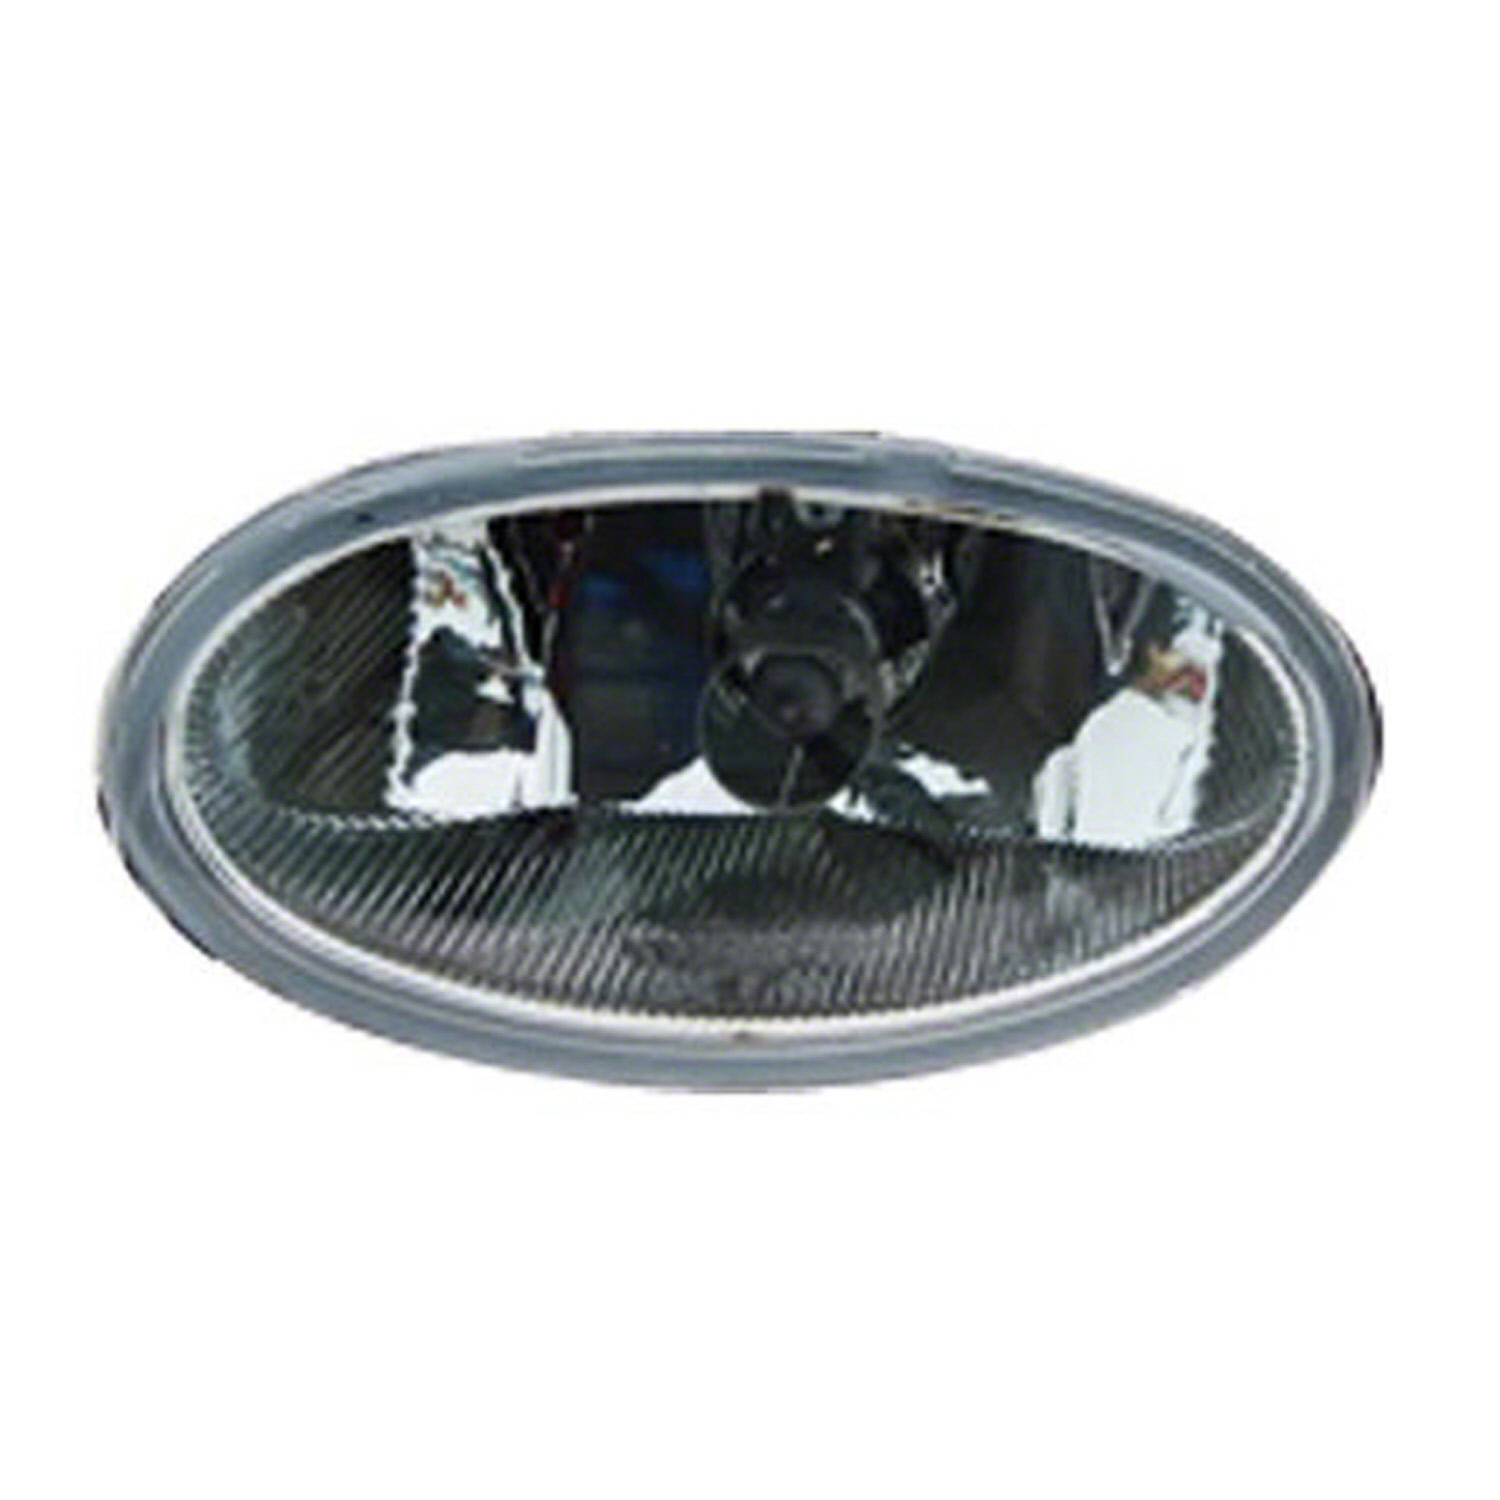 GetAllParts Aftermarket 2004-2008 Acura TSX  Passenger Side Right Fog Light Assembly 33901SECA01 NOT Included Bulb